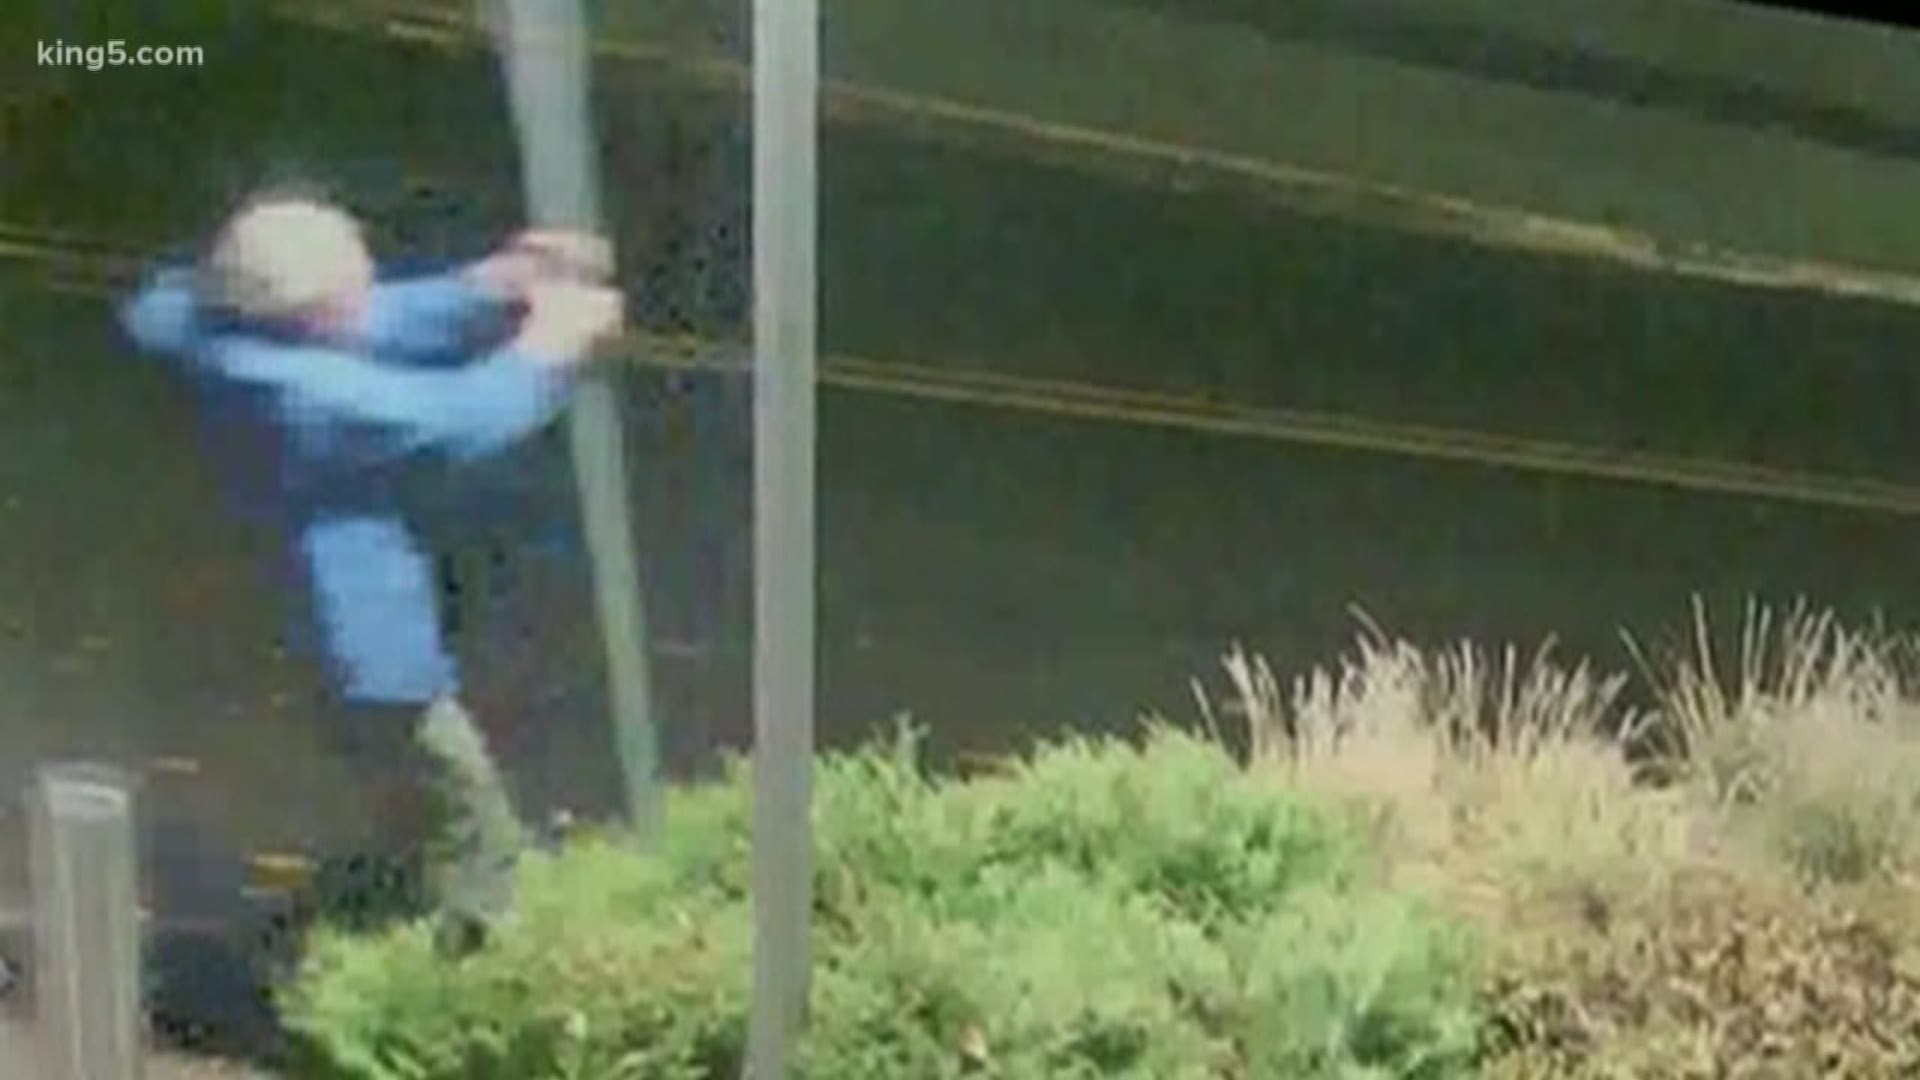 Surveillance video shows a man vandalizing buildings at the state Capitol campus in Olympia.